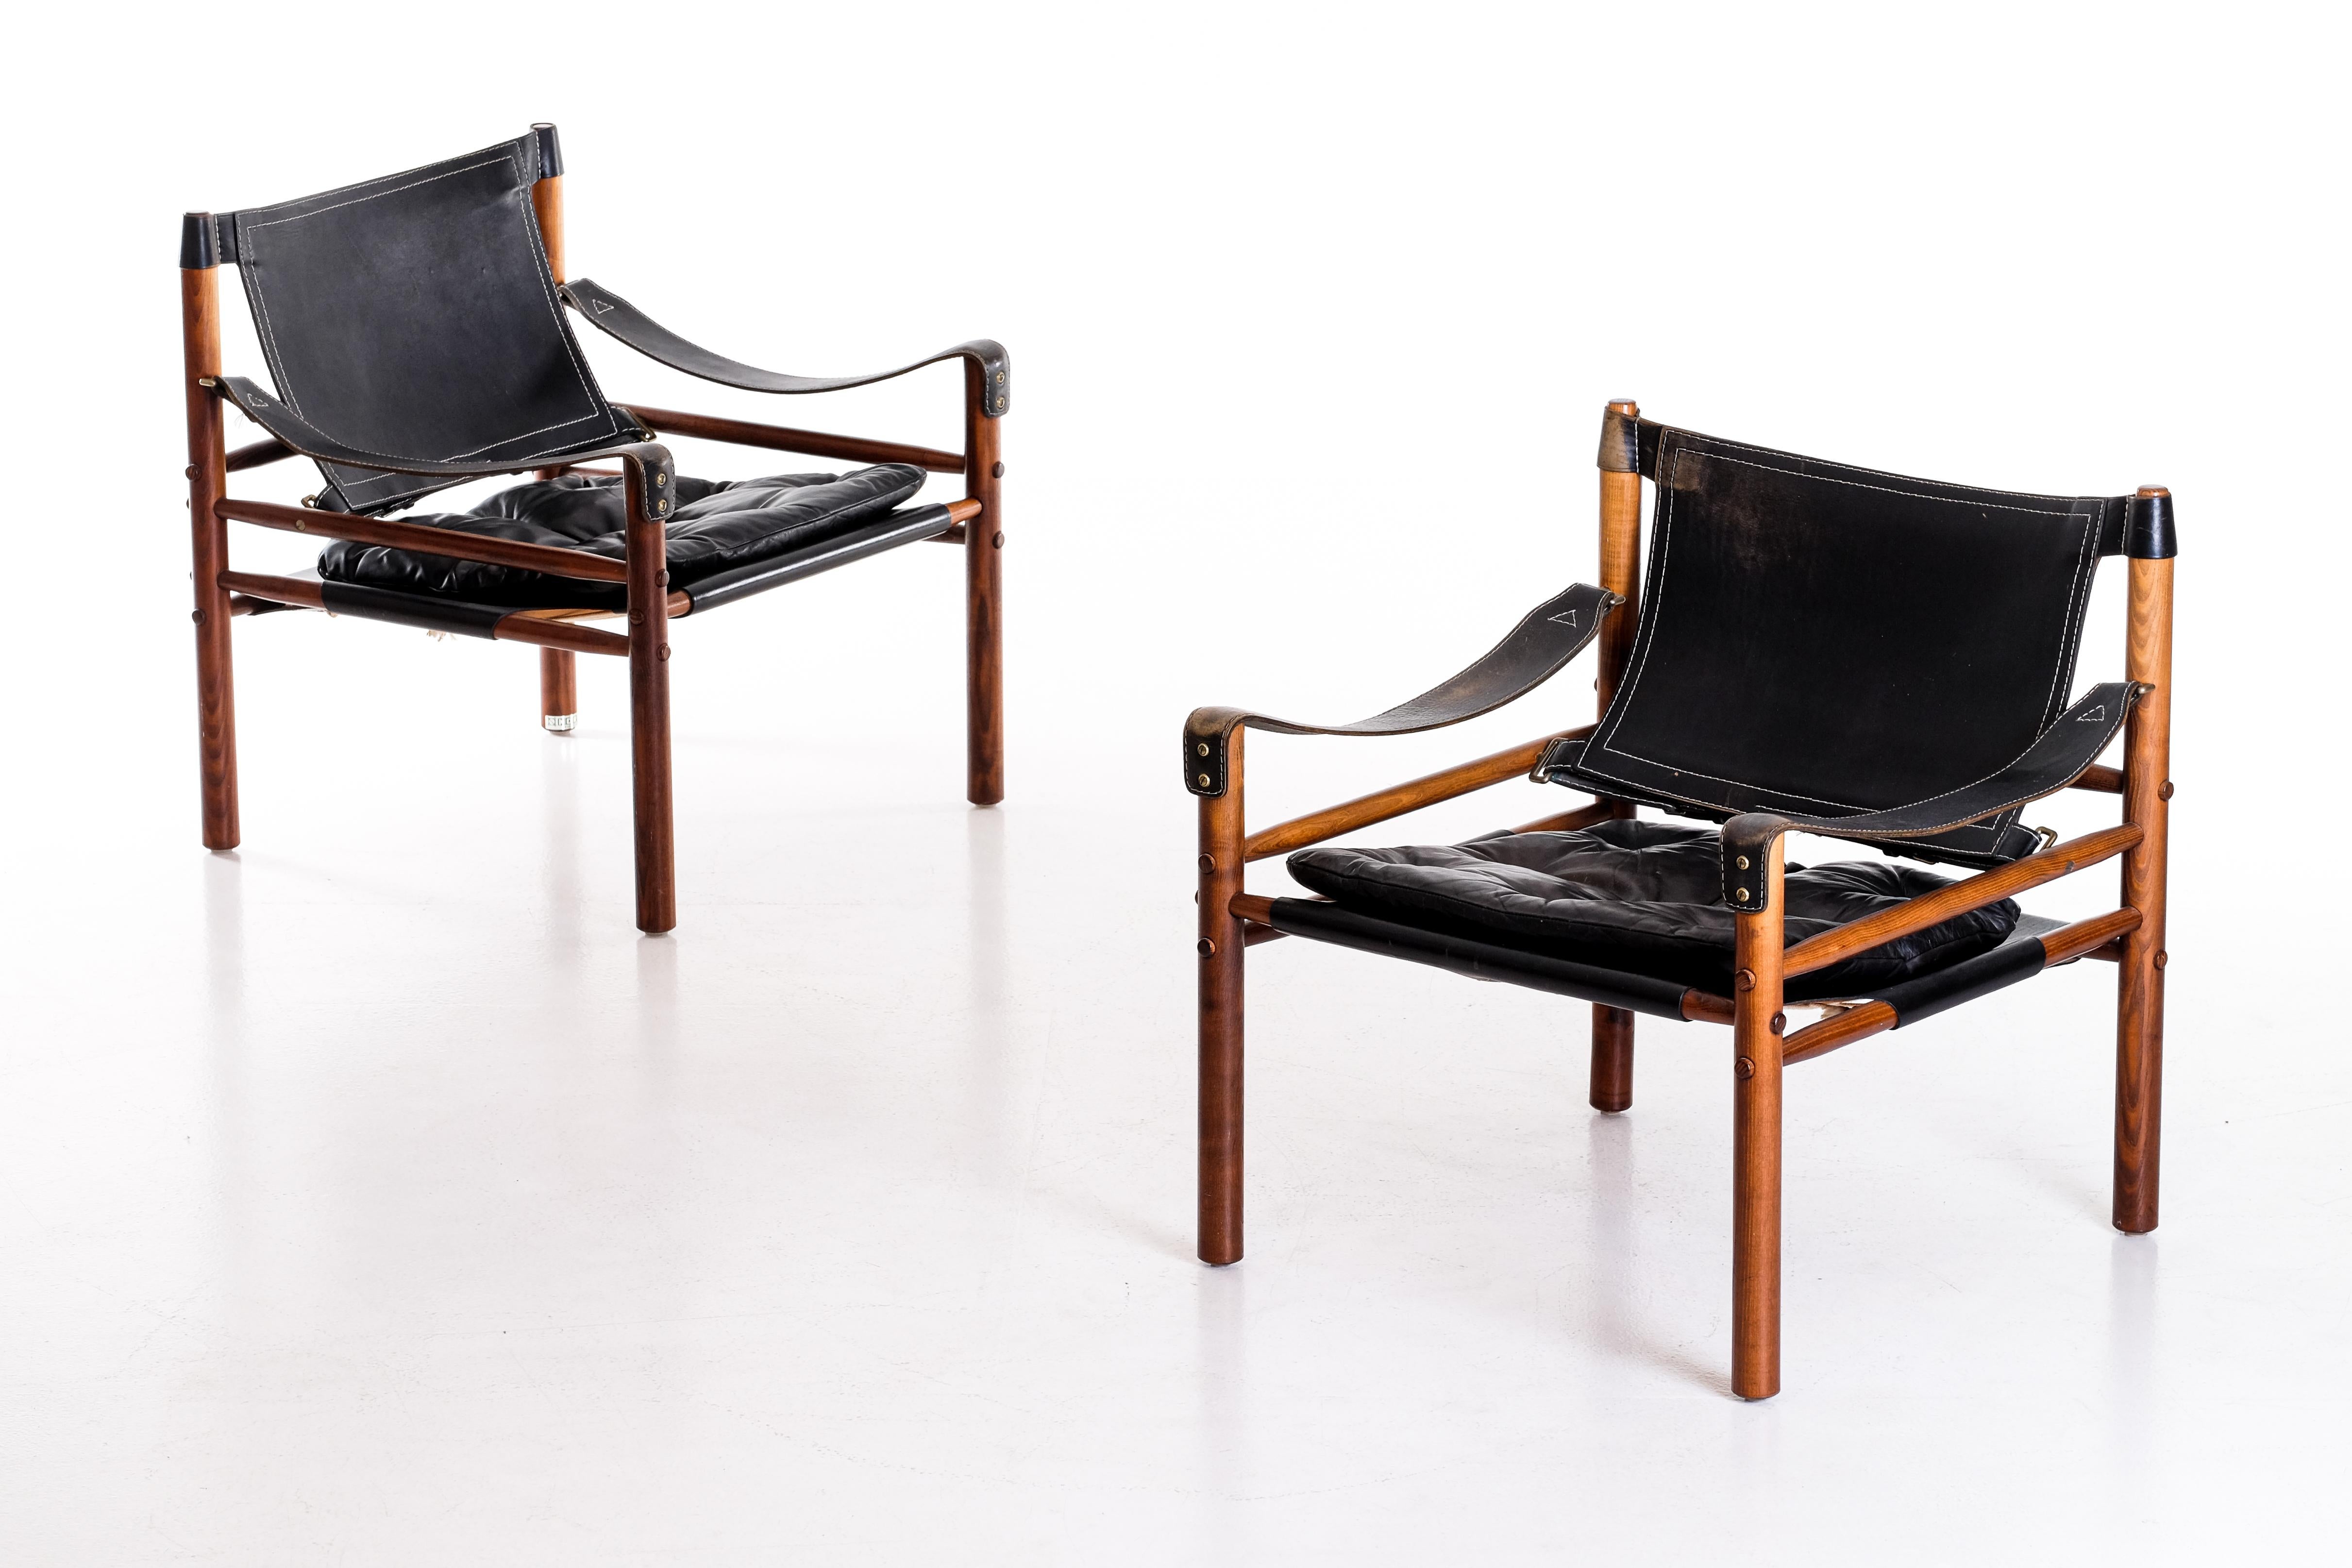 Pair of safari chairs model Sirocco in good condition with original black leather.
Designed by Arne Norell, produced by Arne Norell AB in Aneby, Sweden, 1960s.
Global front door shipping, delivery within 10 days: €1000.




